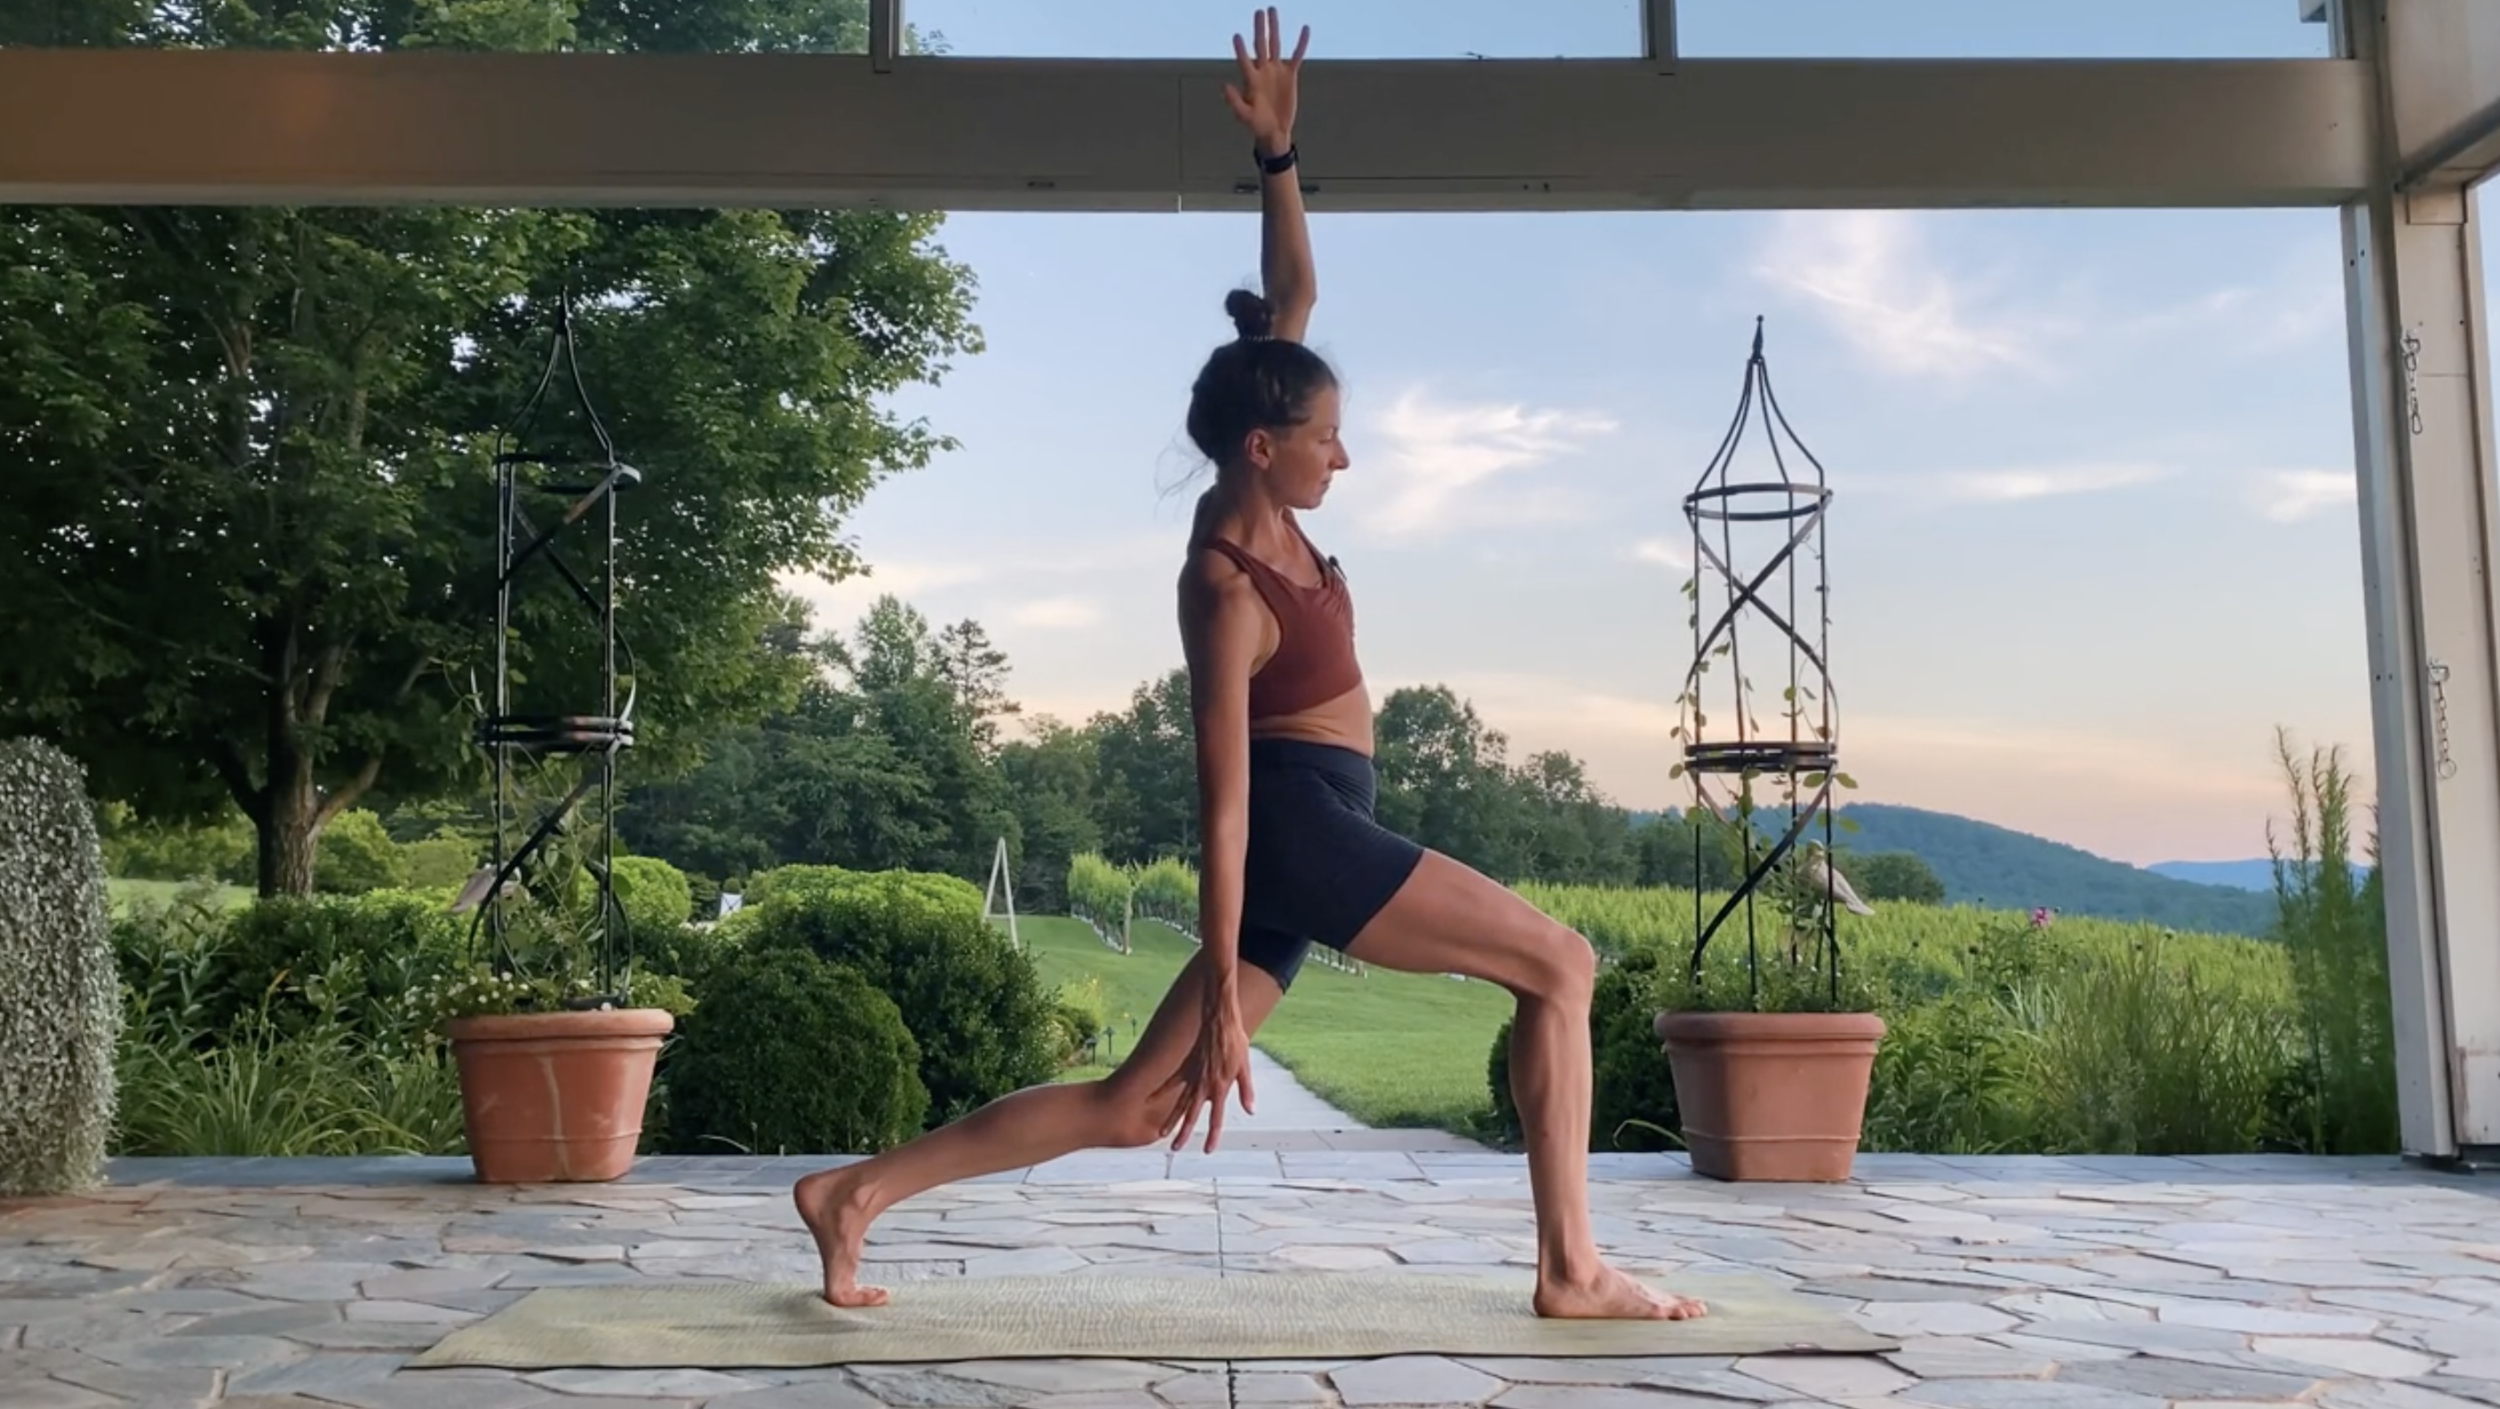 Mid-flow with high lunge: this movement involves dropping the back knee slightly to get a quad stretch while reaching the arm on the same side up and over to get into that side of the hip.